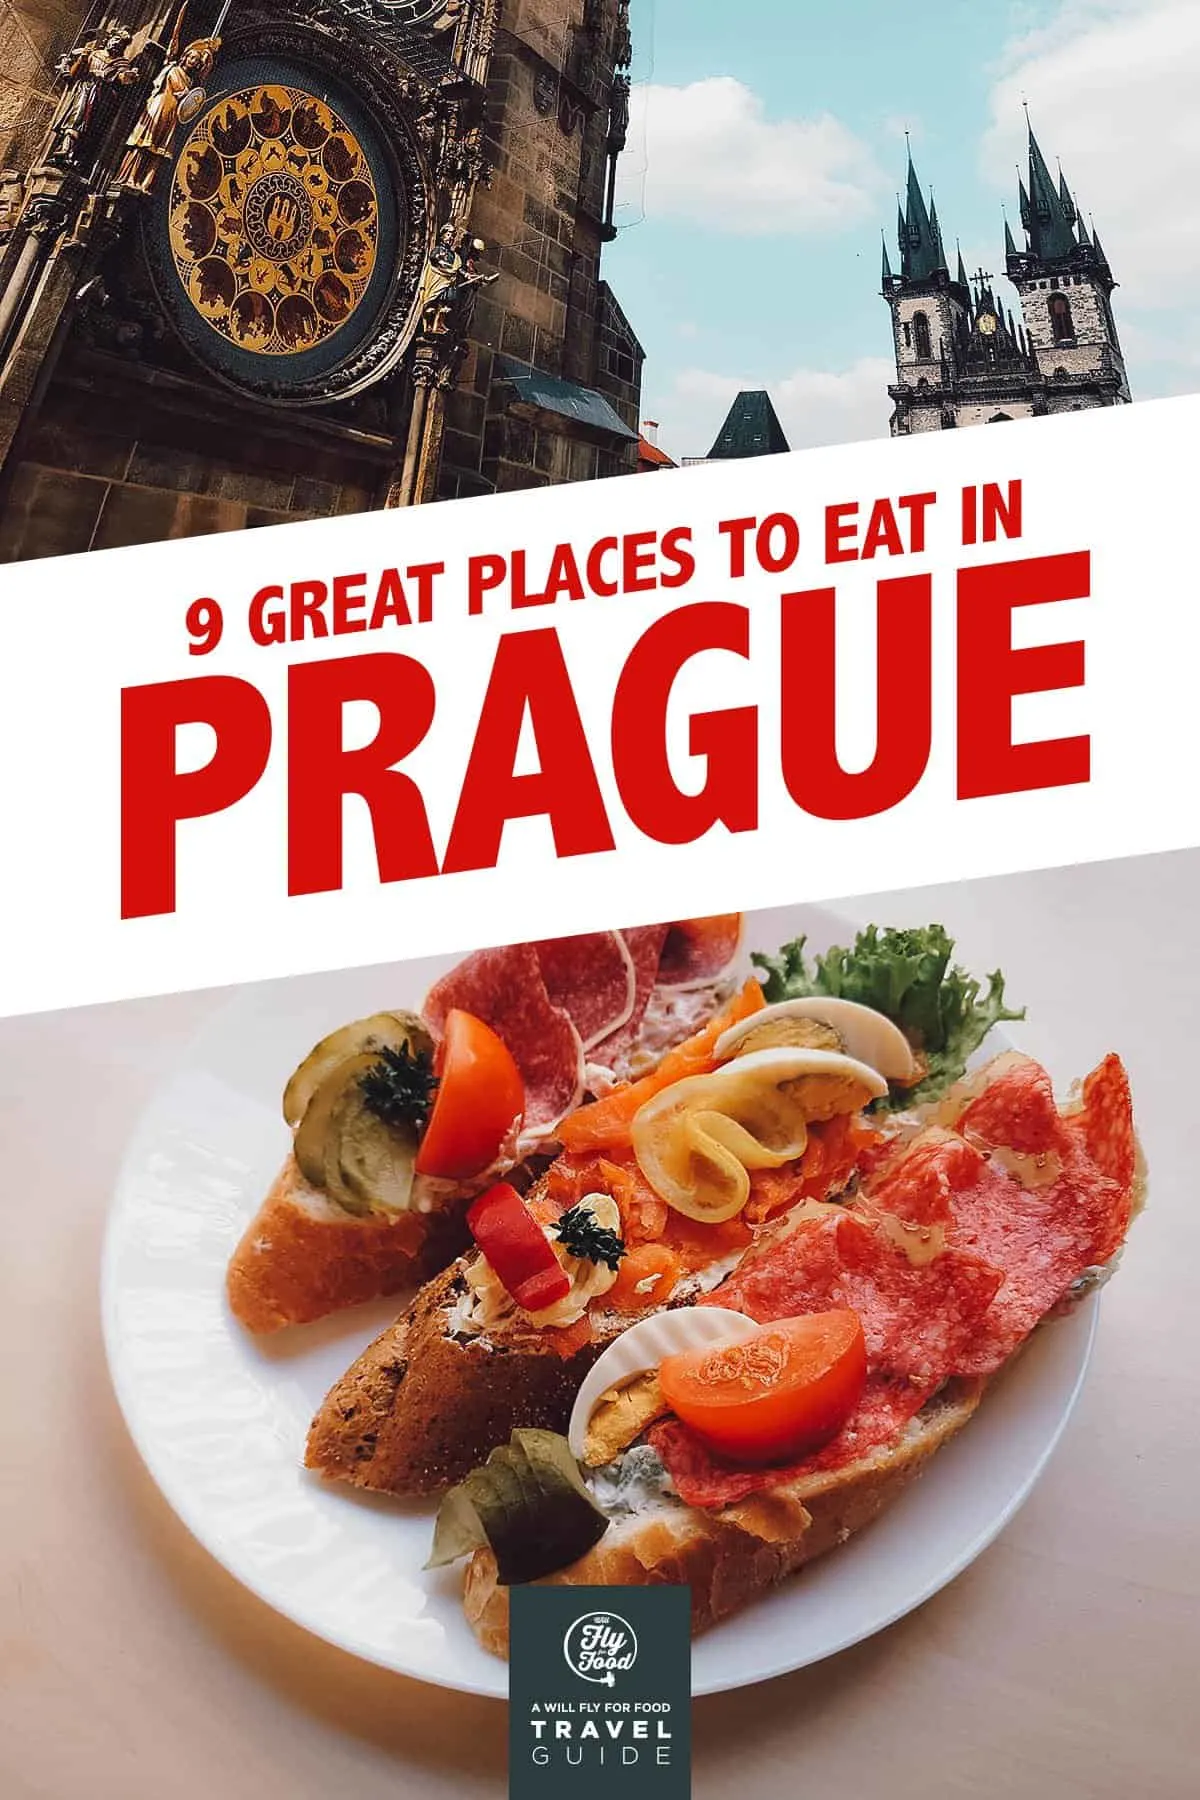 Prague You'll Want to Fly For | Will Fly for Food